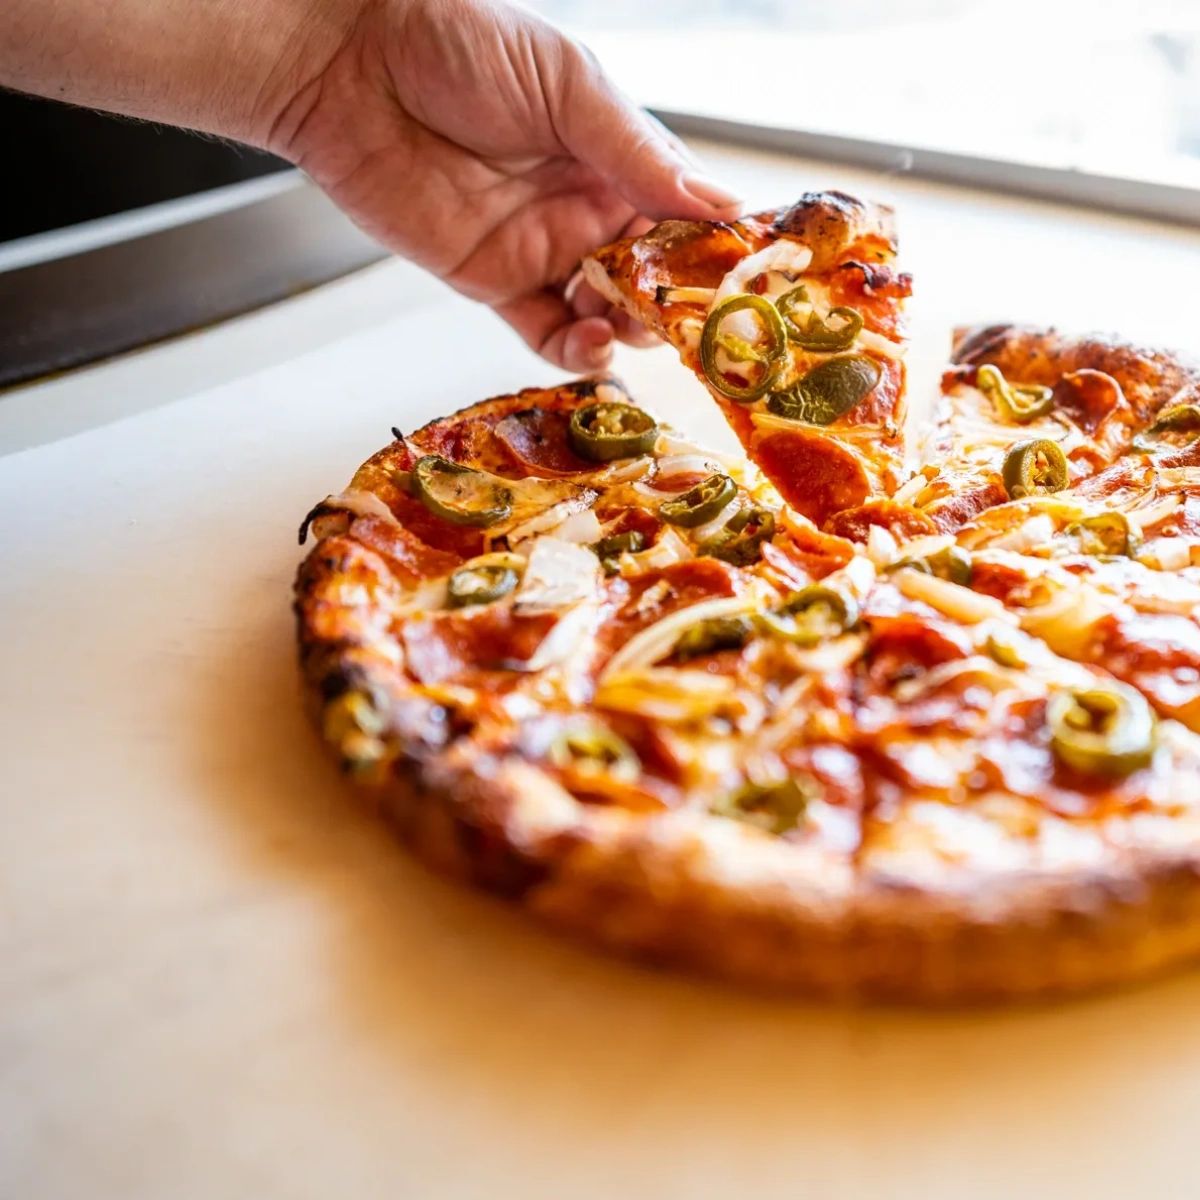 Fun Fact: The average American eats approximately 46 slices of pizza per year! How many slices do you think you've eaten so far this year? 🍕 #PizzaDOro #DCPizza #DCFoodie #DCFoodScene #DCEats